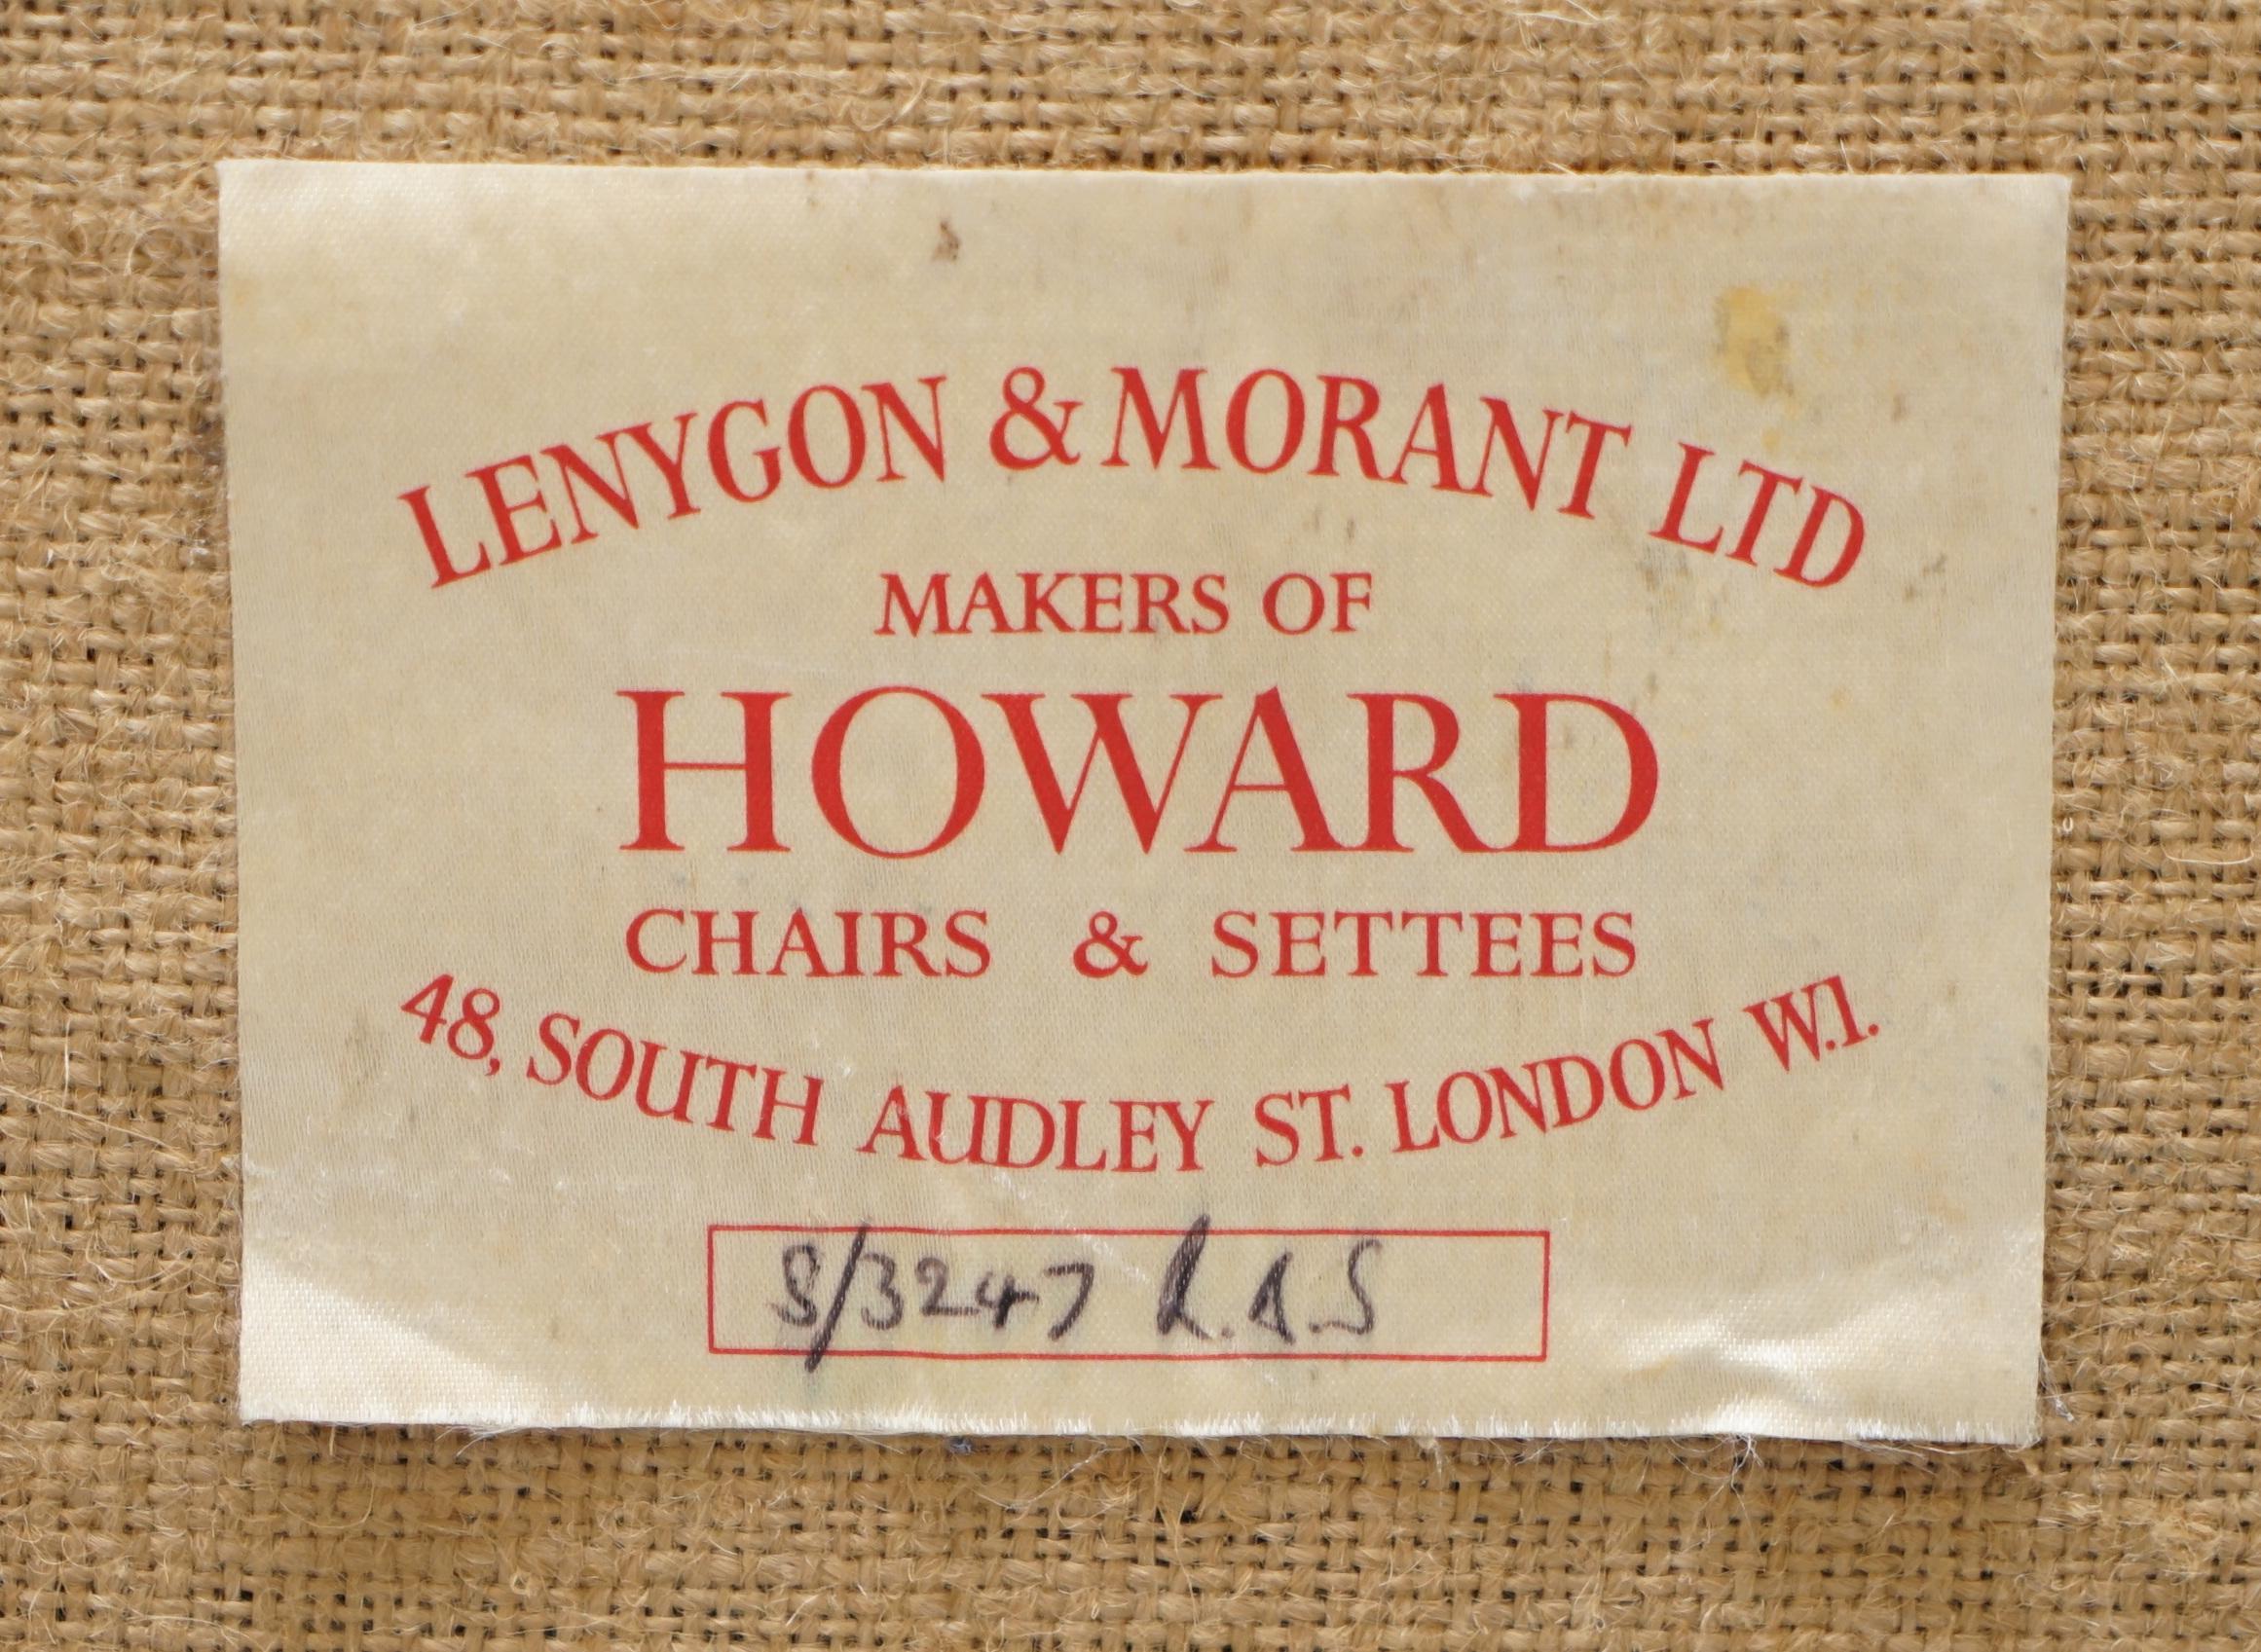 We are delighted to offer for sale this lovely original 1954-1959 Howard & Son’s armchair retailed through Lenygon & Morant LTD 48 South Audley St London W1

A very good looking well made and decorative armchair, it has the original label to the